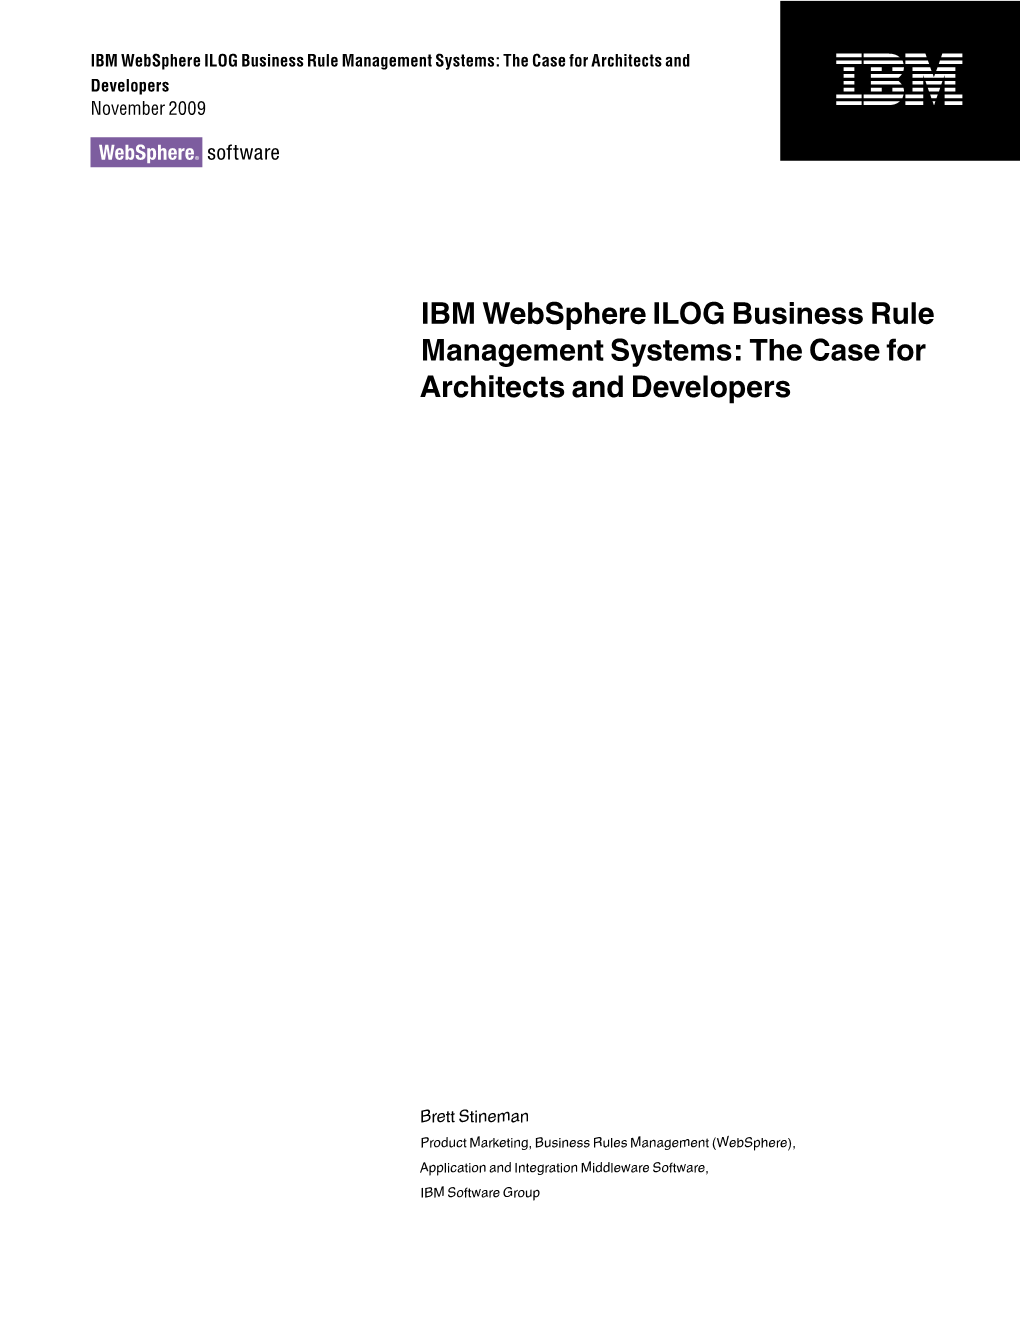 IBM Websphere ILOG Business Rule Management Systems: the Case for Architects and Developers IBM November 2009